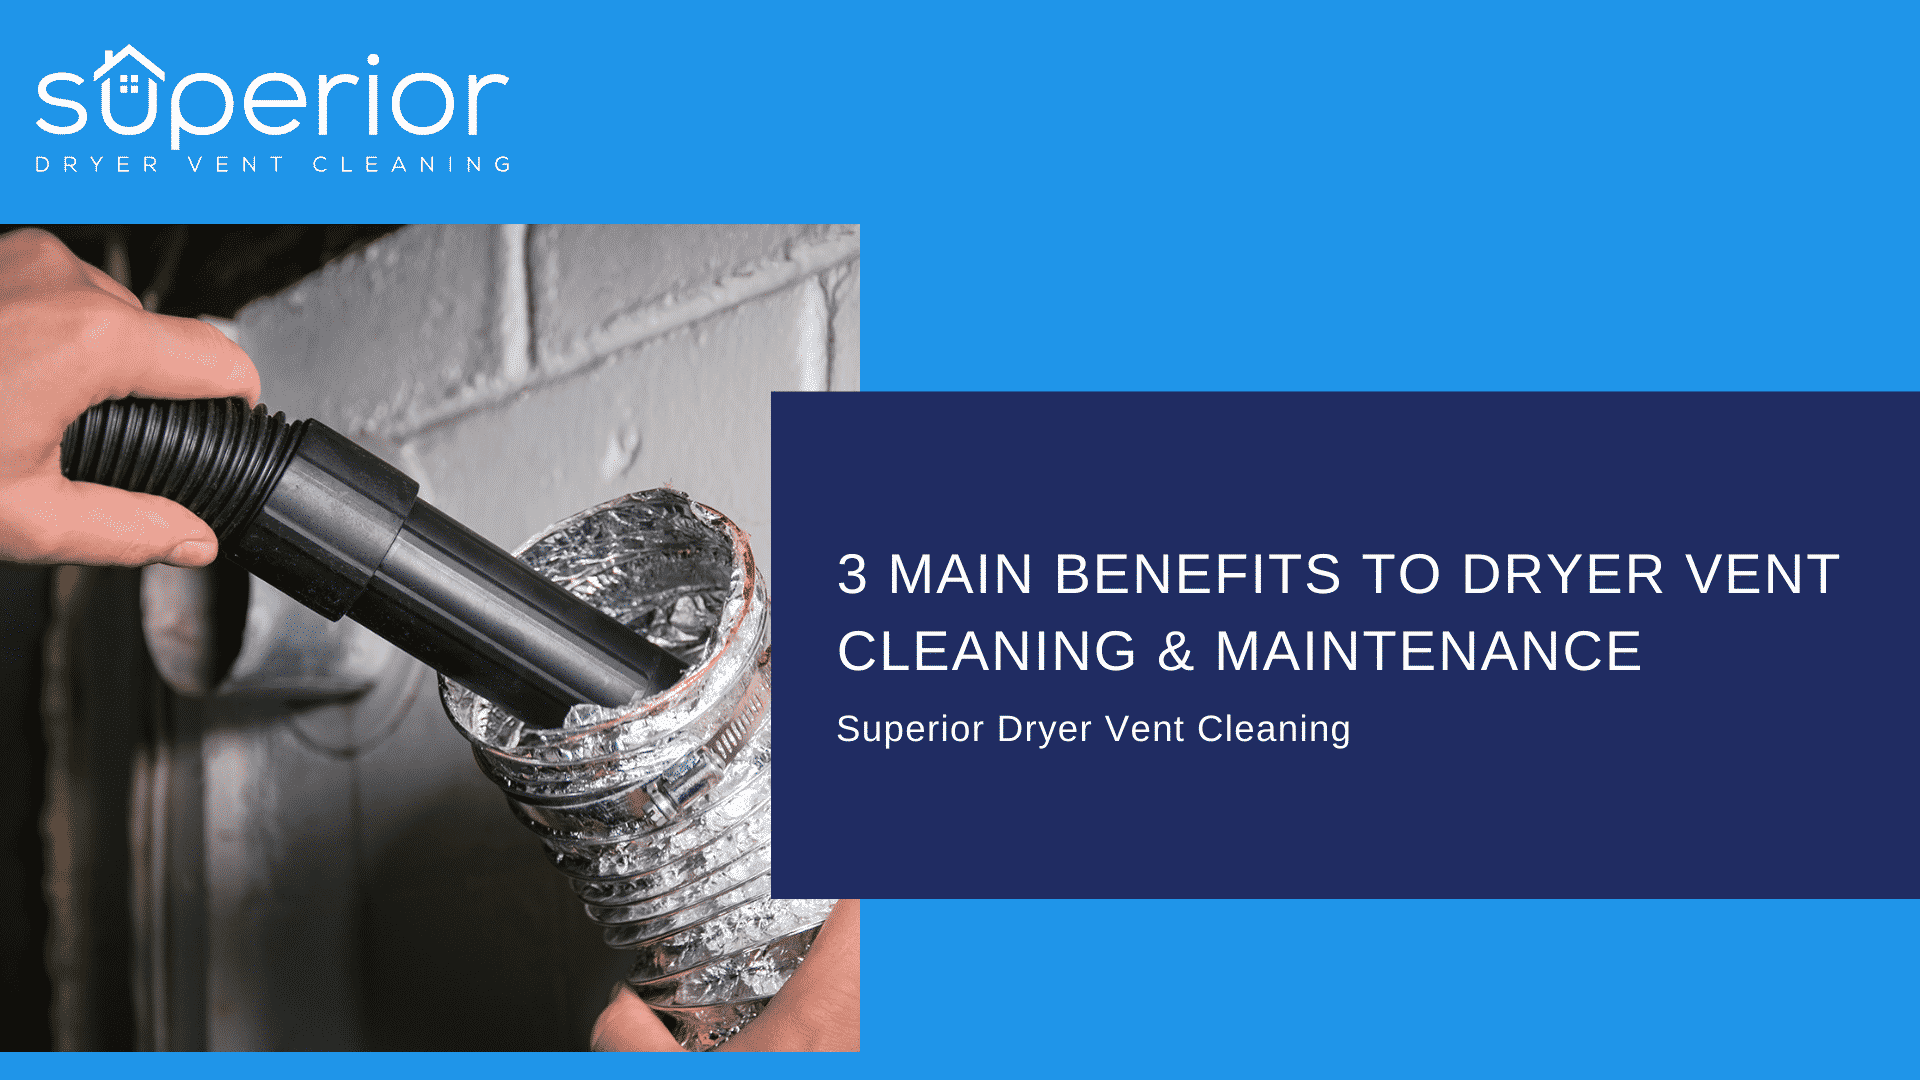 3 Main Benefits to Dryer Vent Cleaning & Maintenance